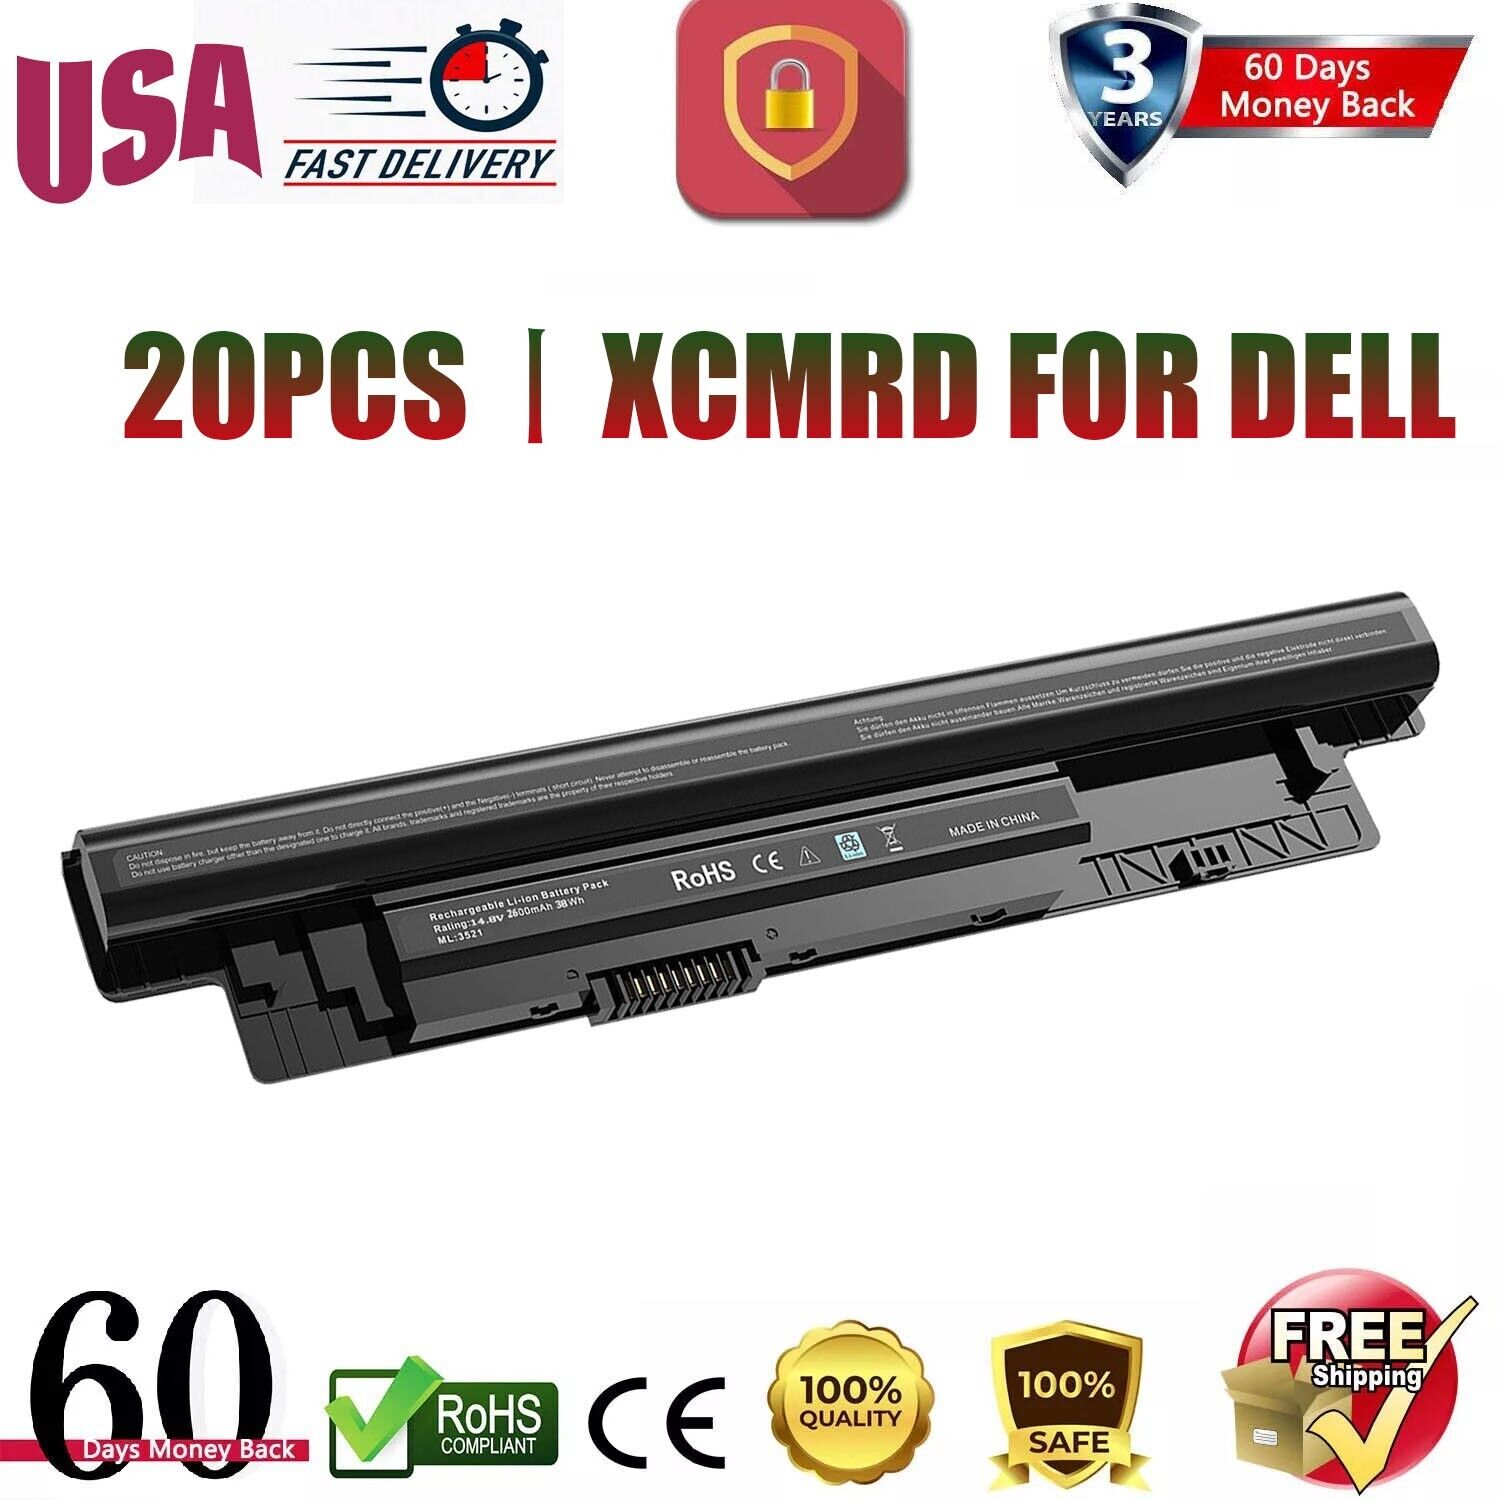 20PCS MR90Y XCMRD Battery for Dell Inspiron 17R 5737 5721 17 5748 3721 15R 5537